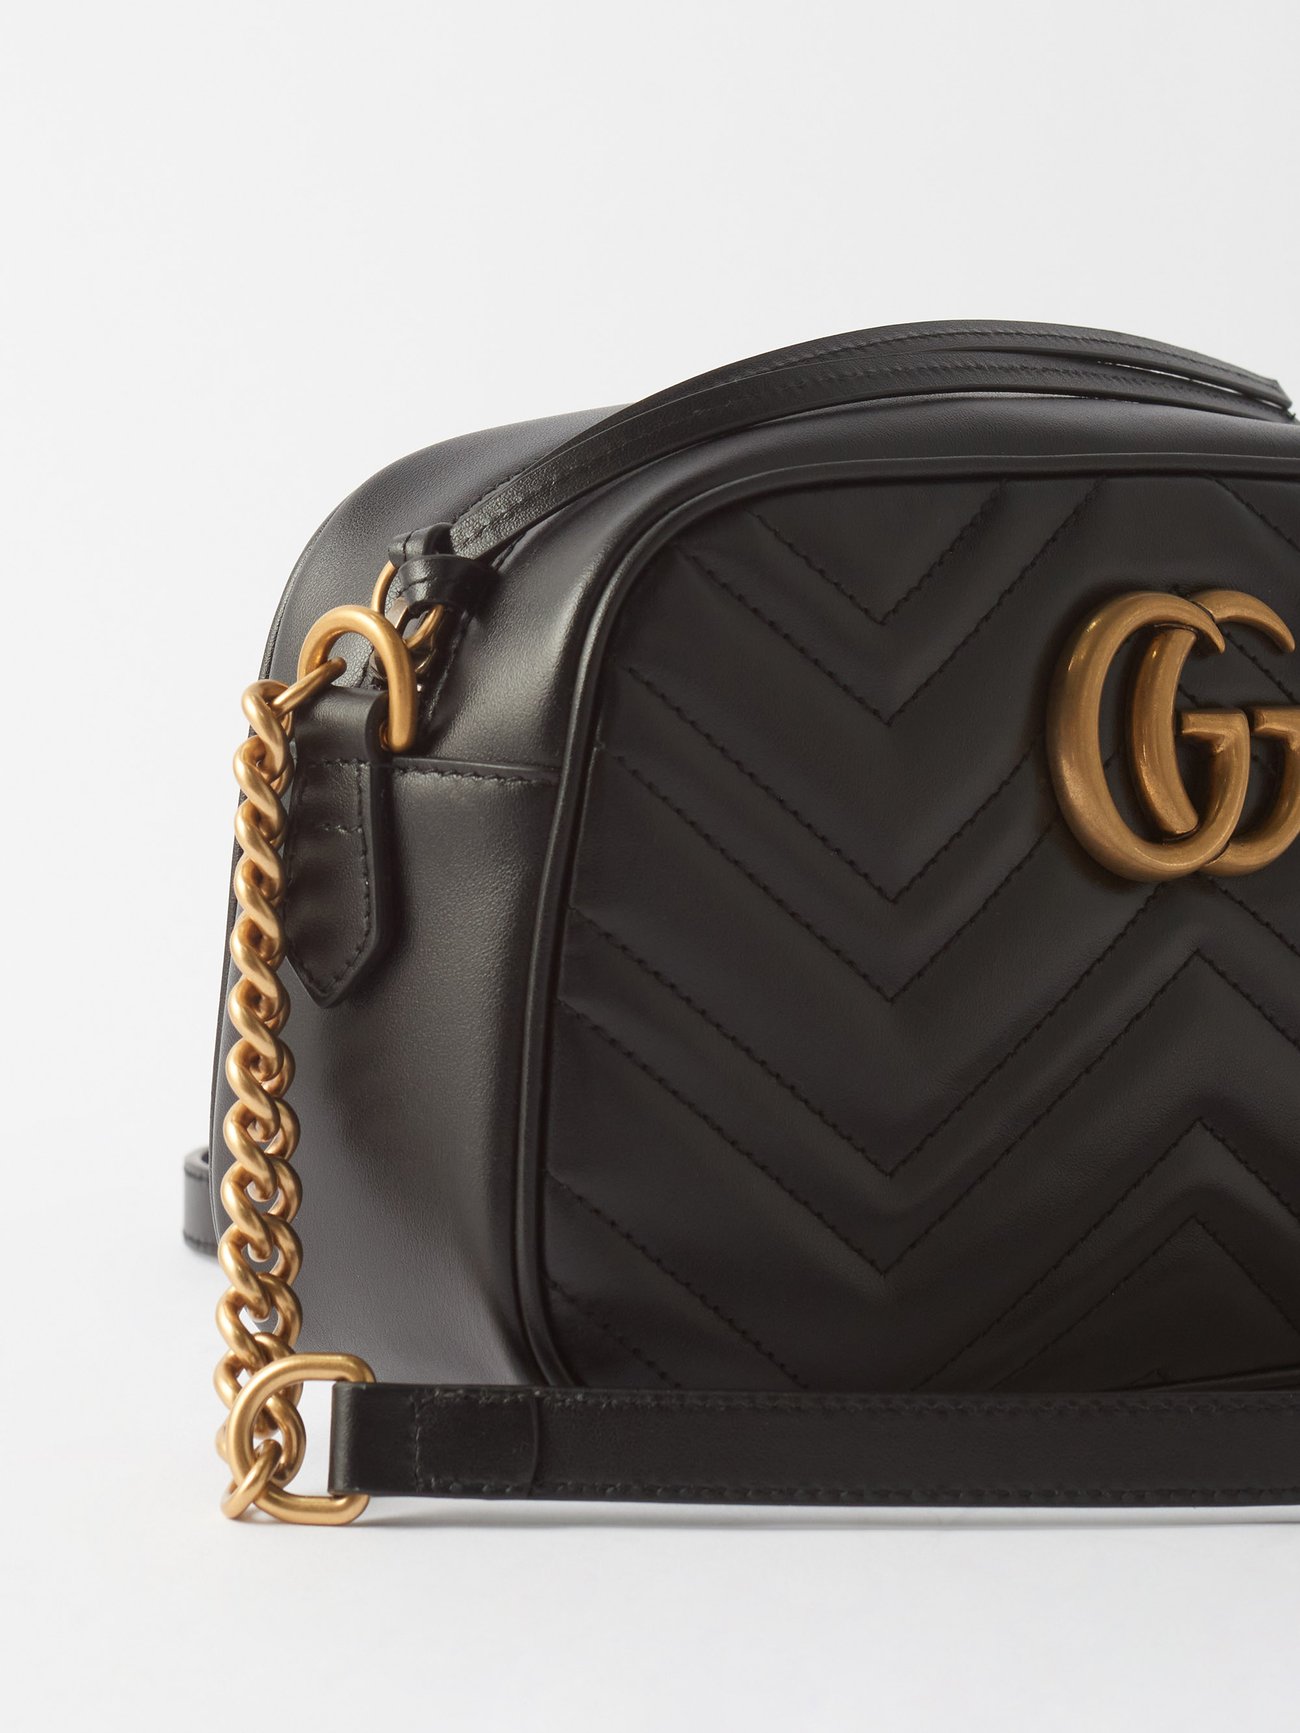 GUCCI GG Marmont Small Camera Bag in Black Leather